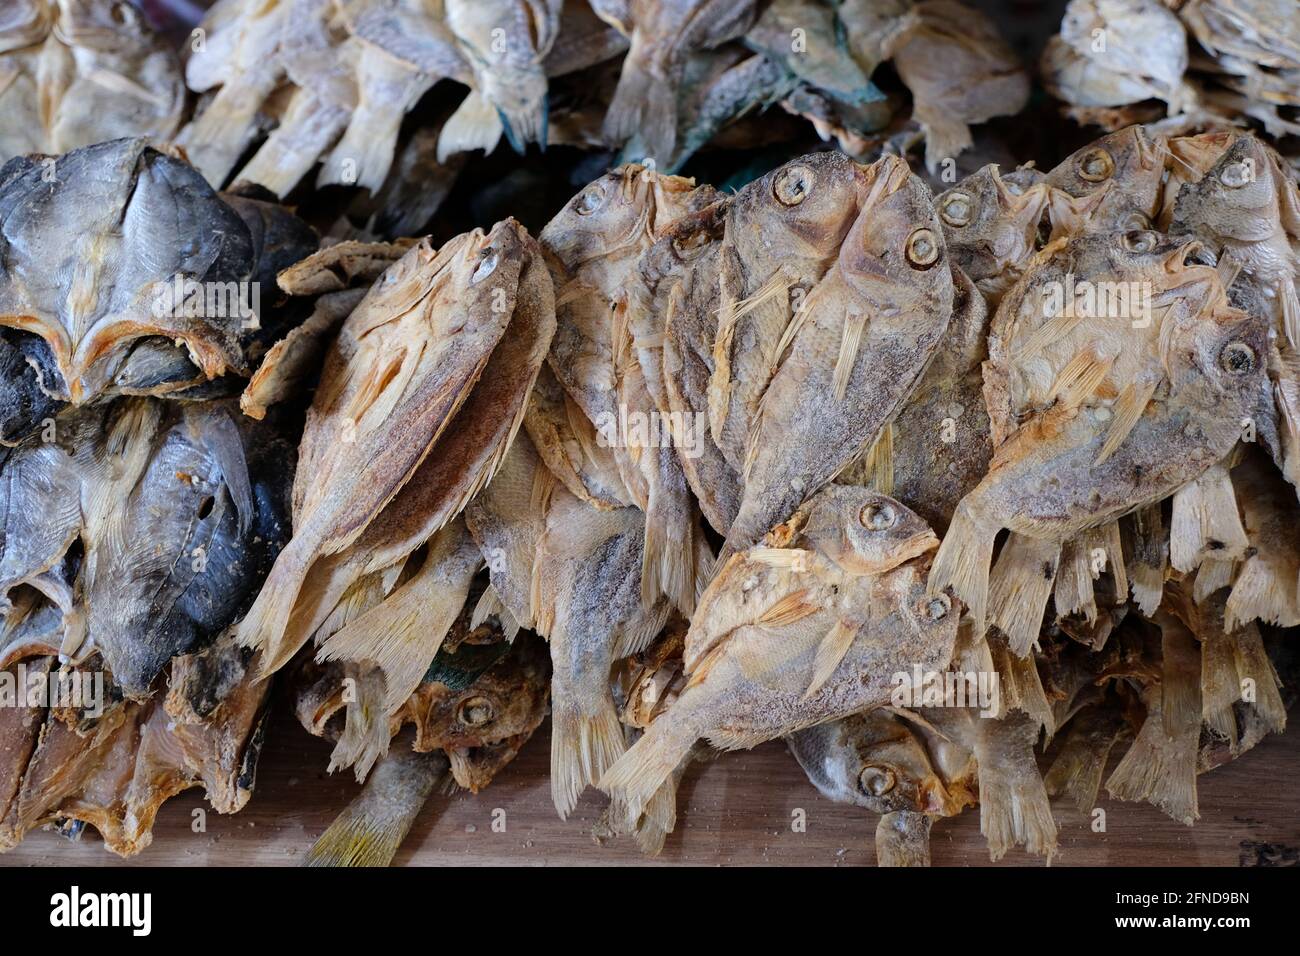 Filipino Dishes, Dried Fishes, Salty, Vegetables Fresh Vegetables Stock Photo